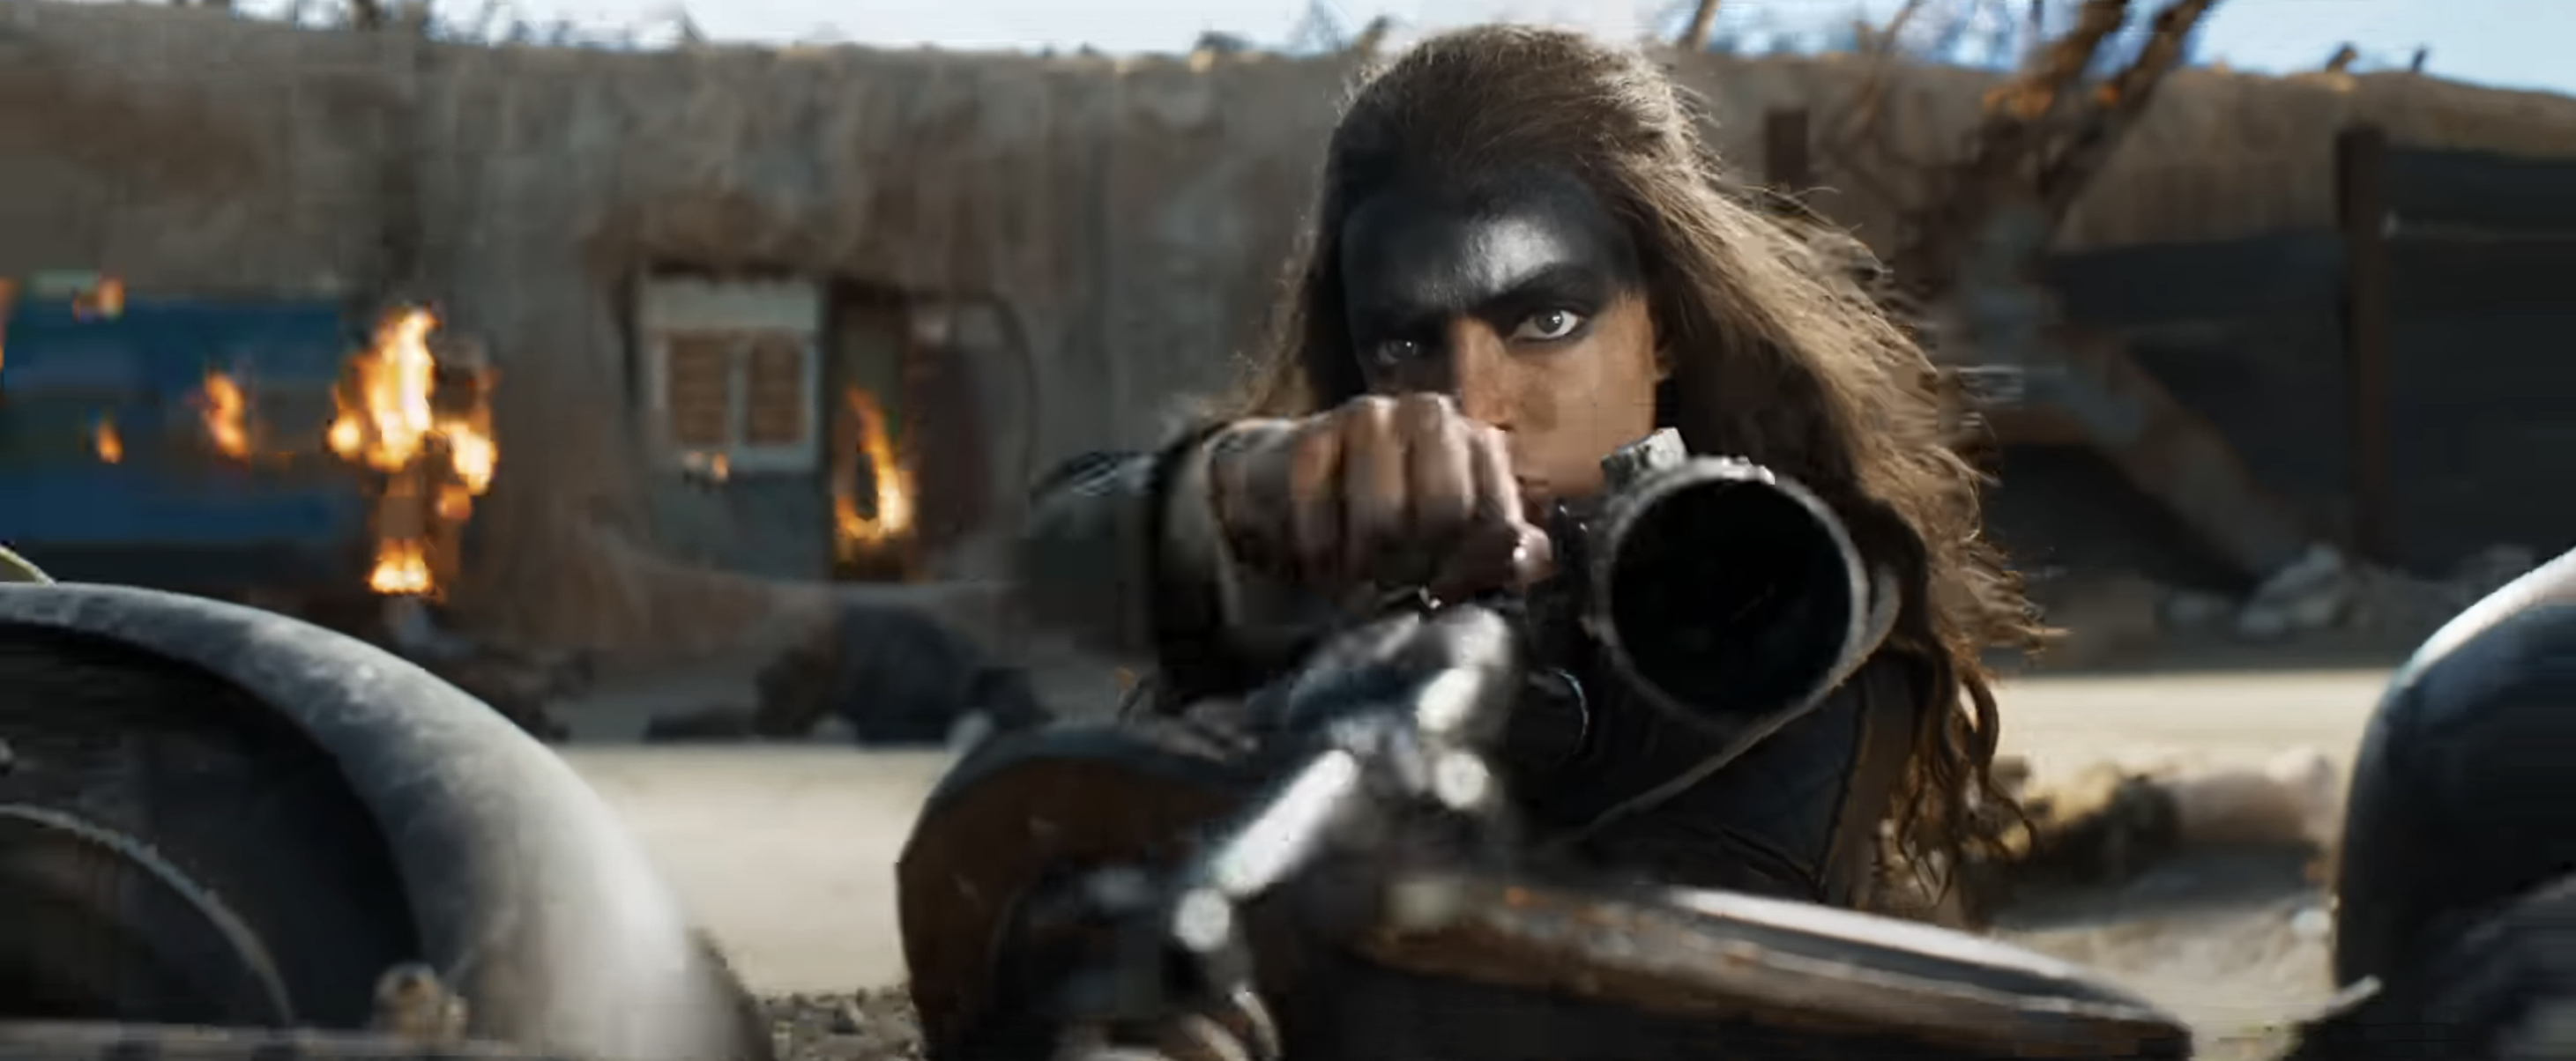 Furiosa in elaborate warrior makeup aims a crossbow, intense expression, post-apocalyptic backdrop